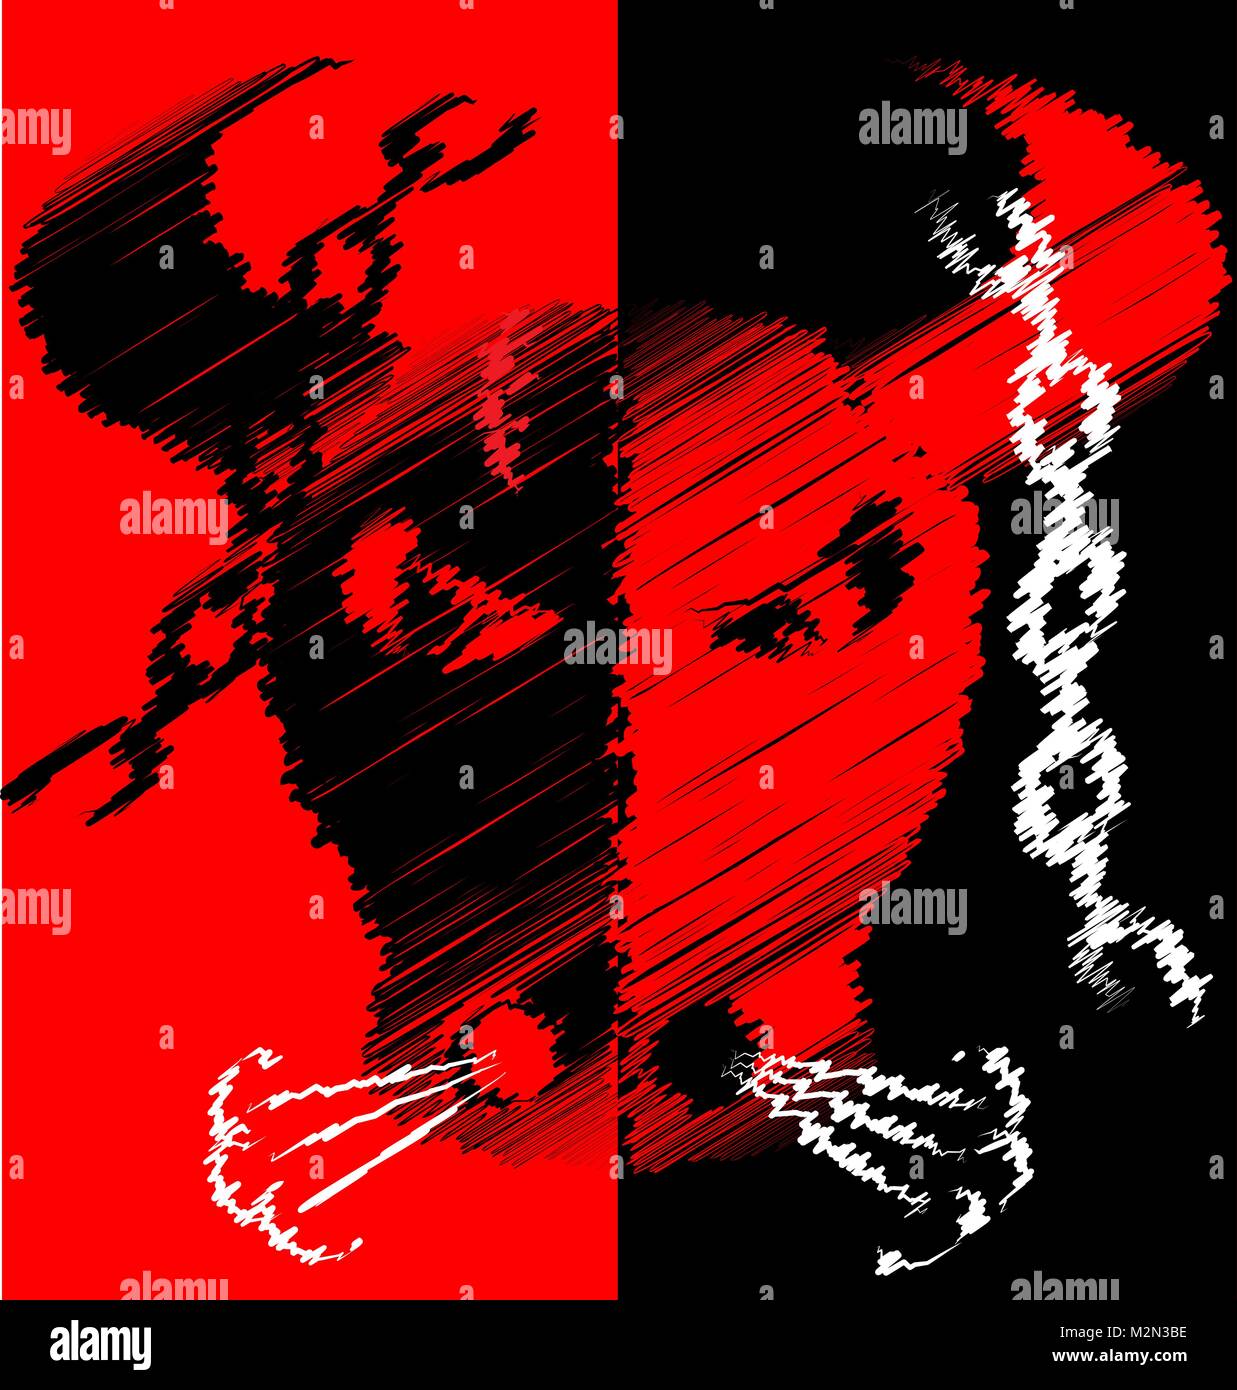 abstract red black image of bull Stock Vector